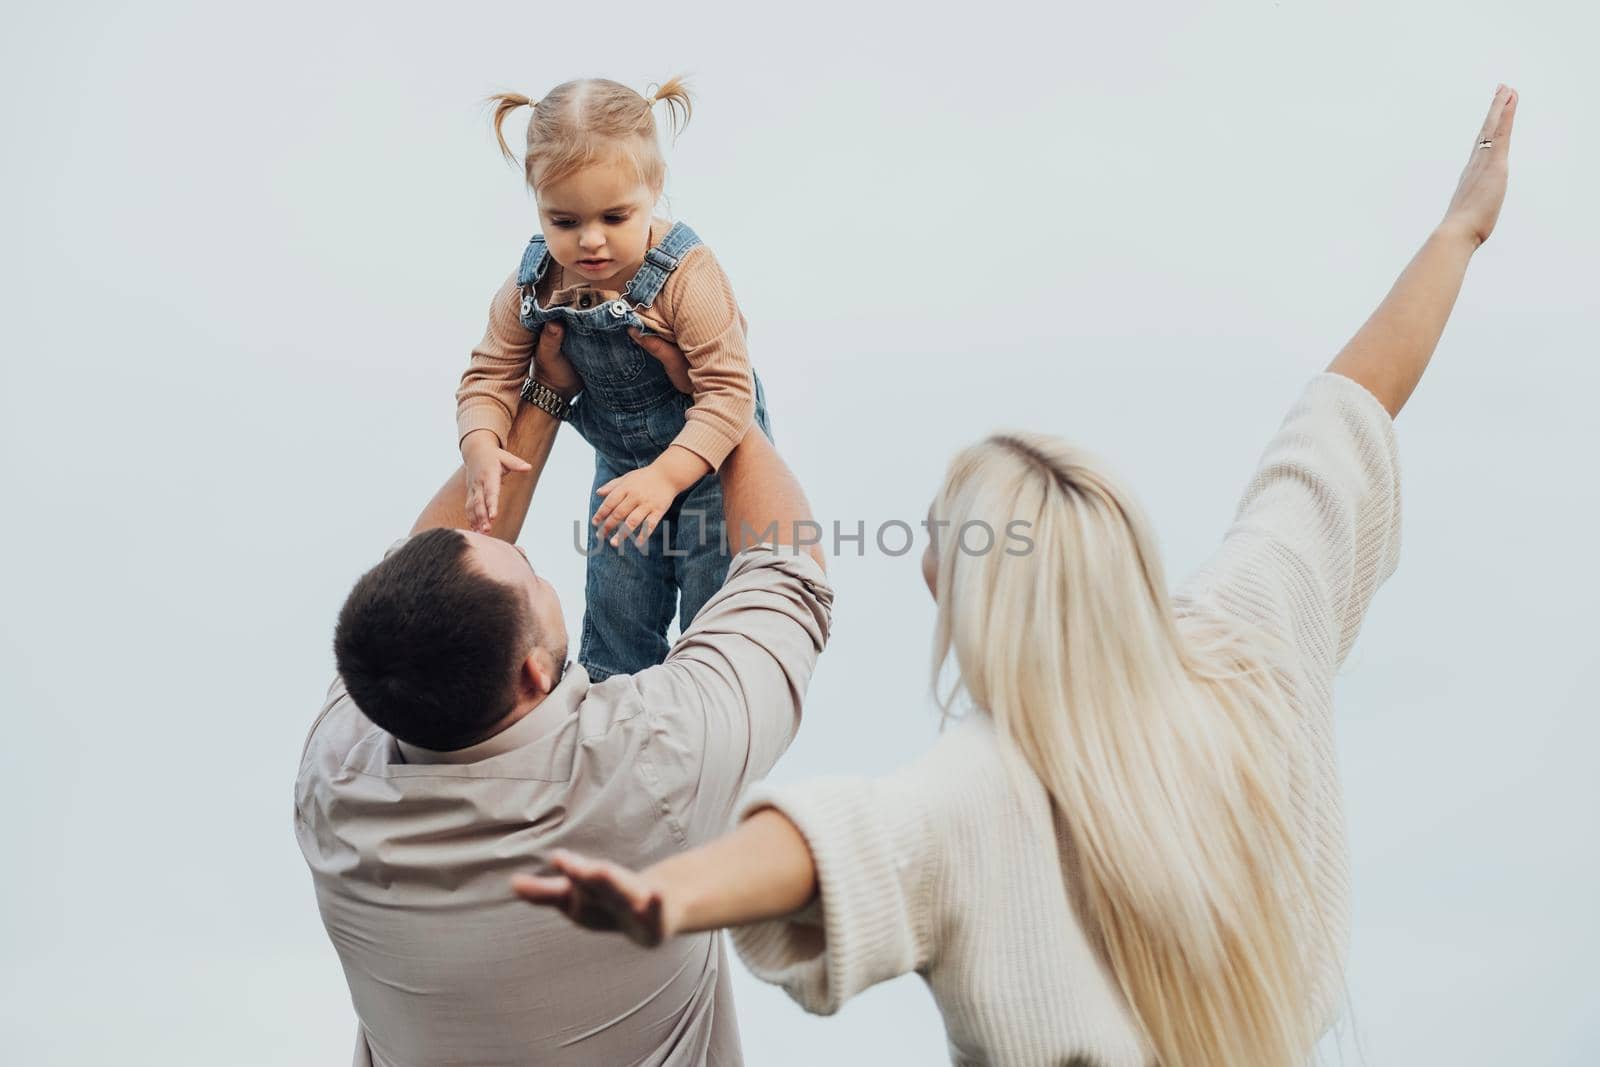 Young Family Having Fun Time Outdoors, Father Holding His Little Daughter in Arms Over Head, Mother Imitating Plane